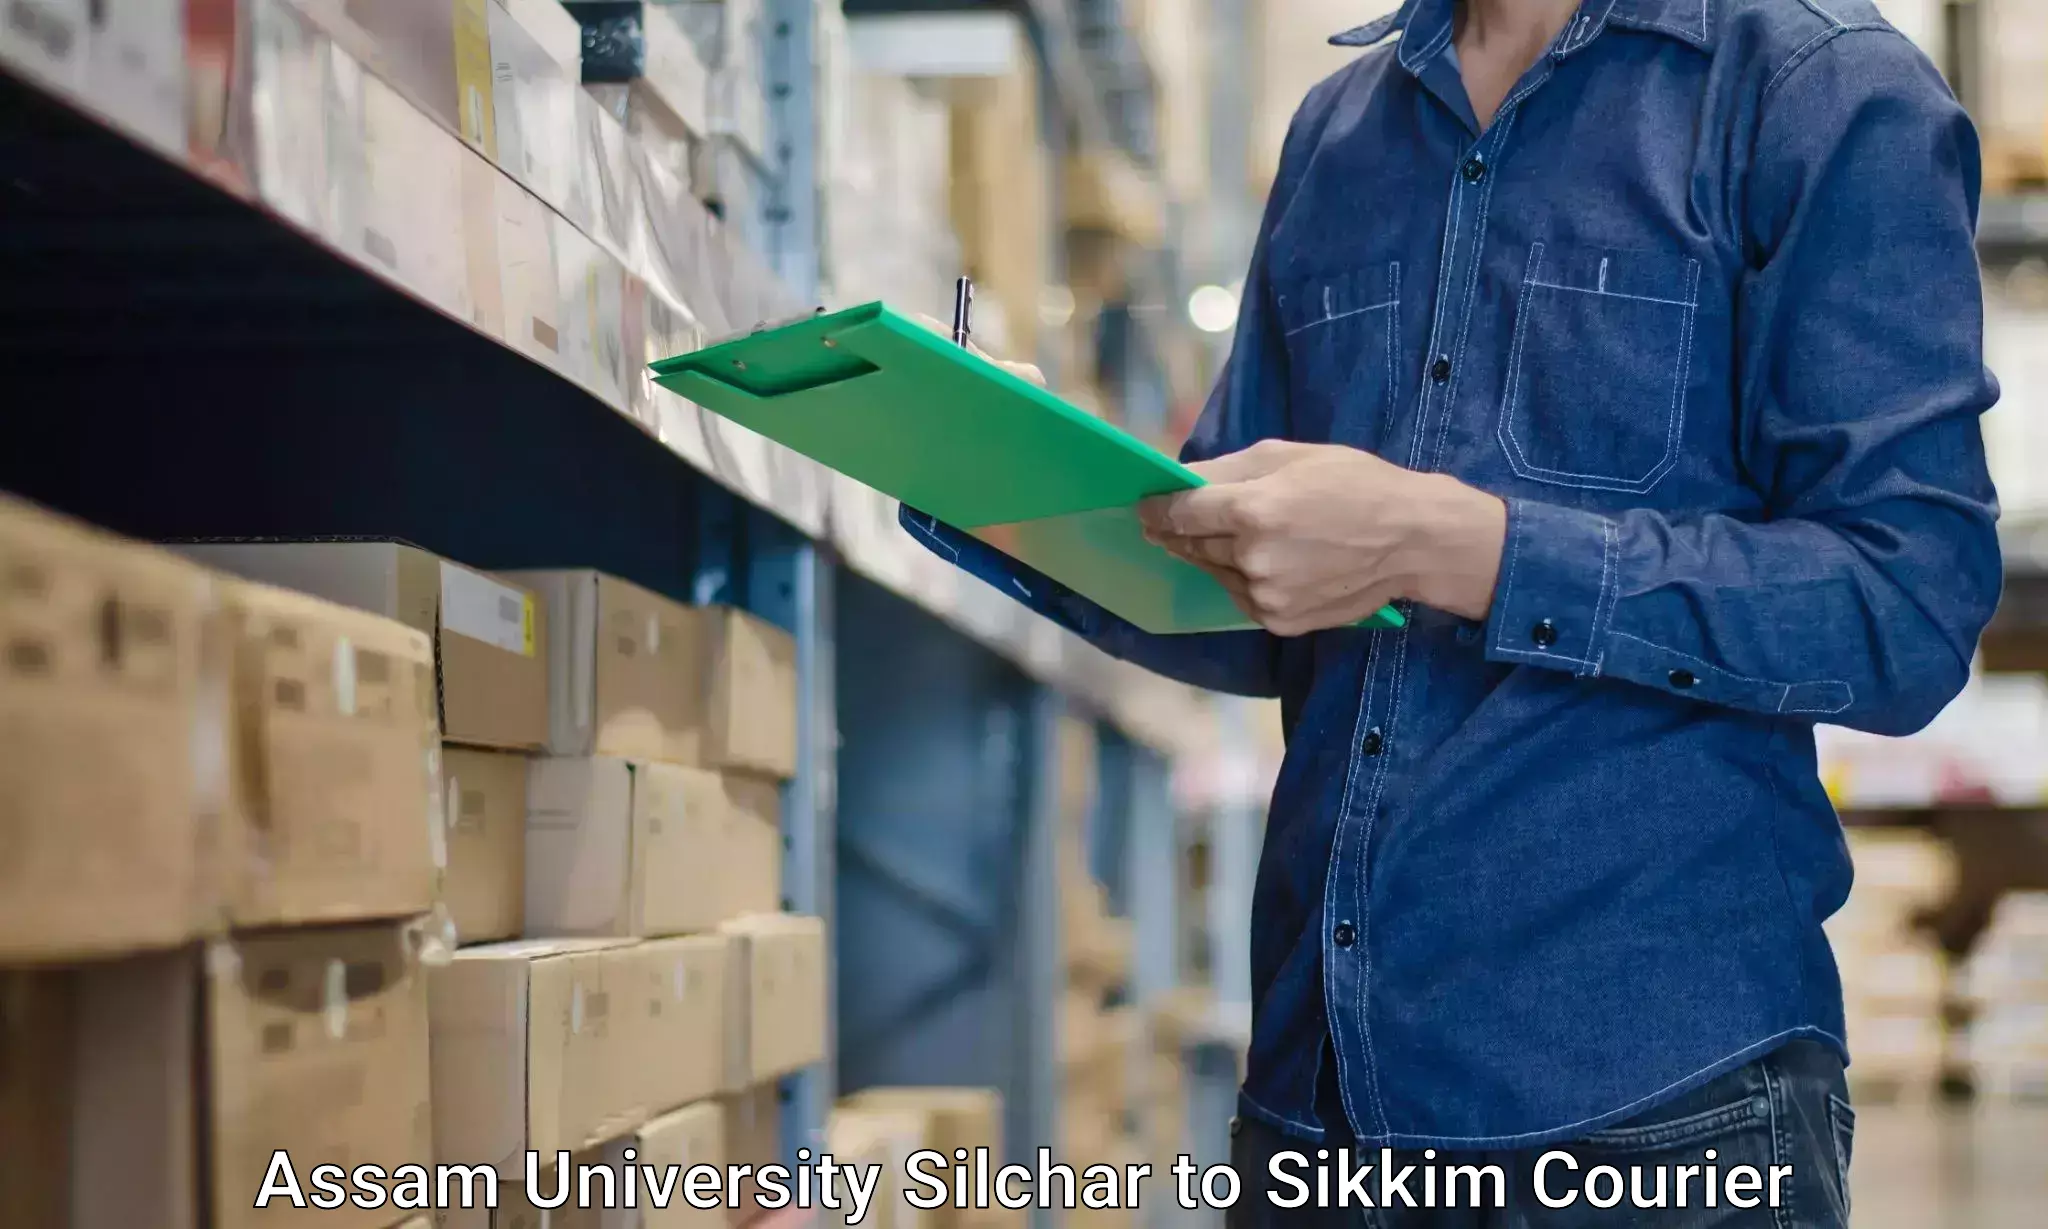 Home shifting experts in Assam University Silchar to North Sikkim